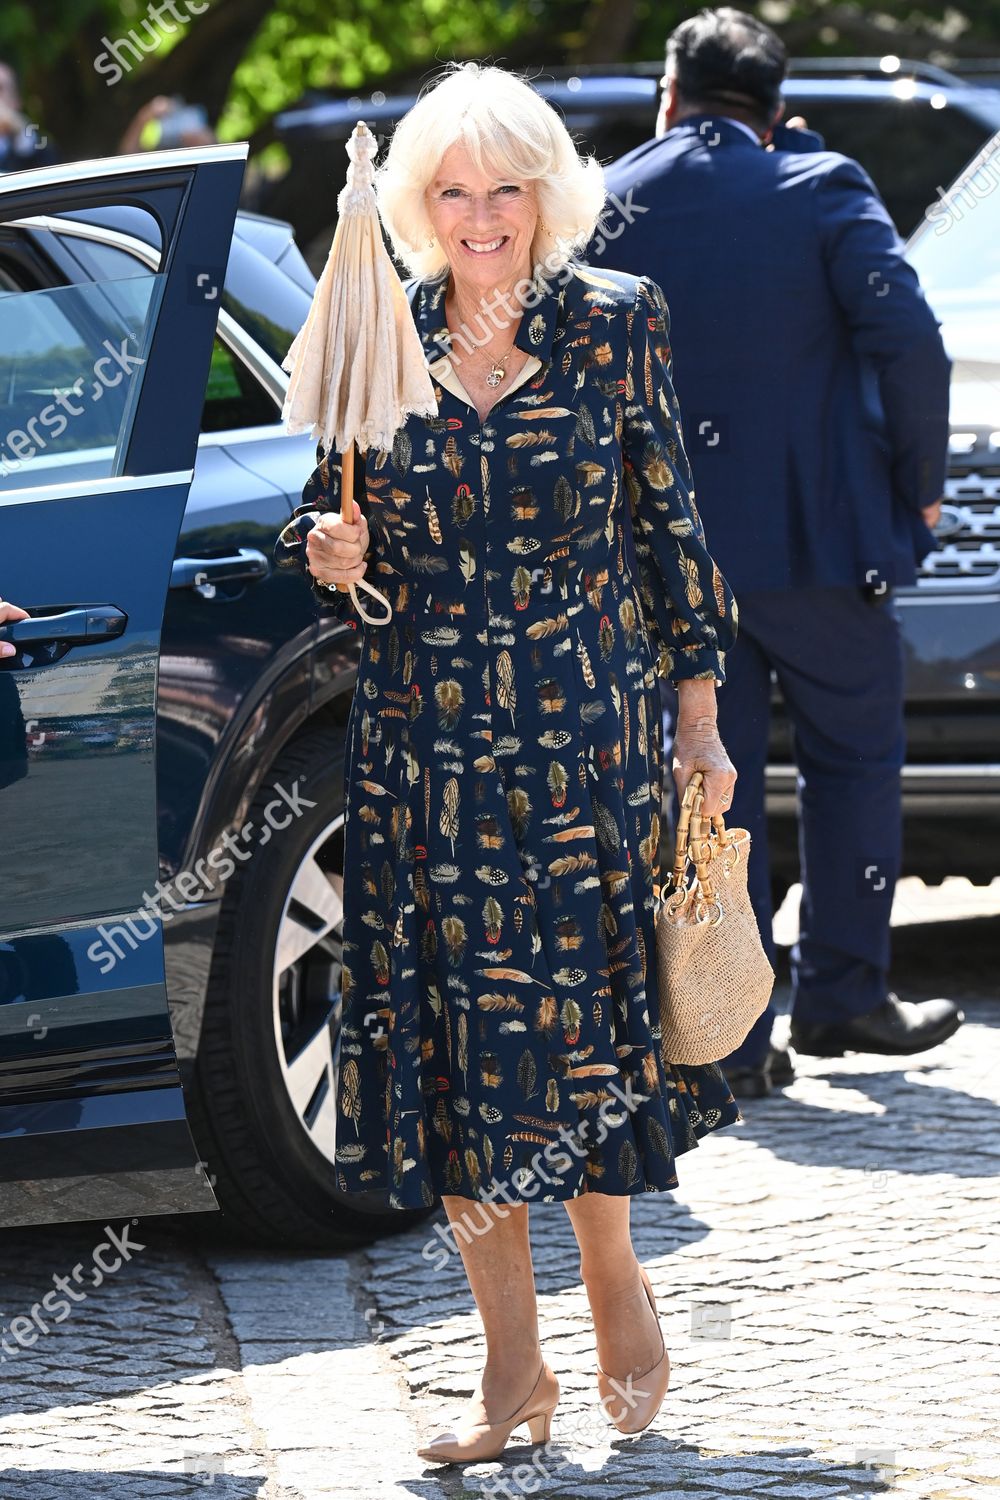 prince-charles-and-camilla-duchess-of-cornwall-visit-to-devon-and-cornwall-day-1-uk-shutterstock-editorial-12221468a.jpg